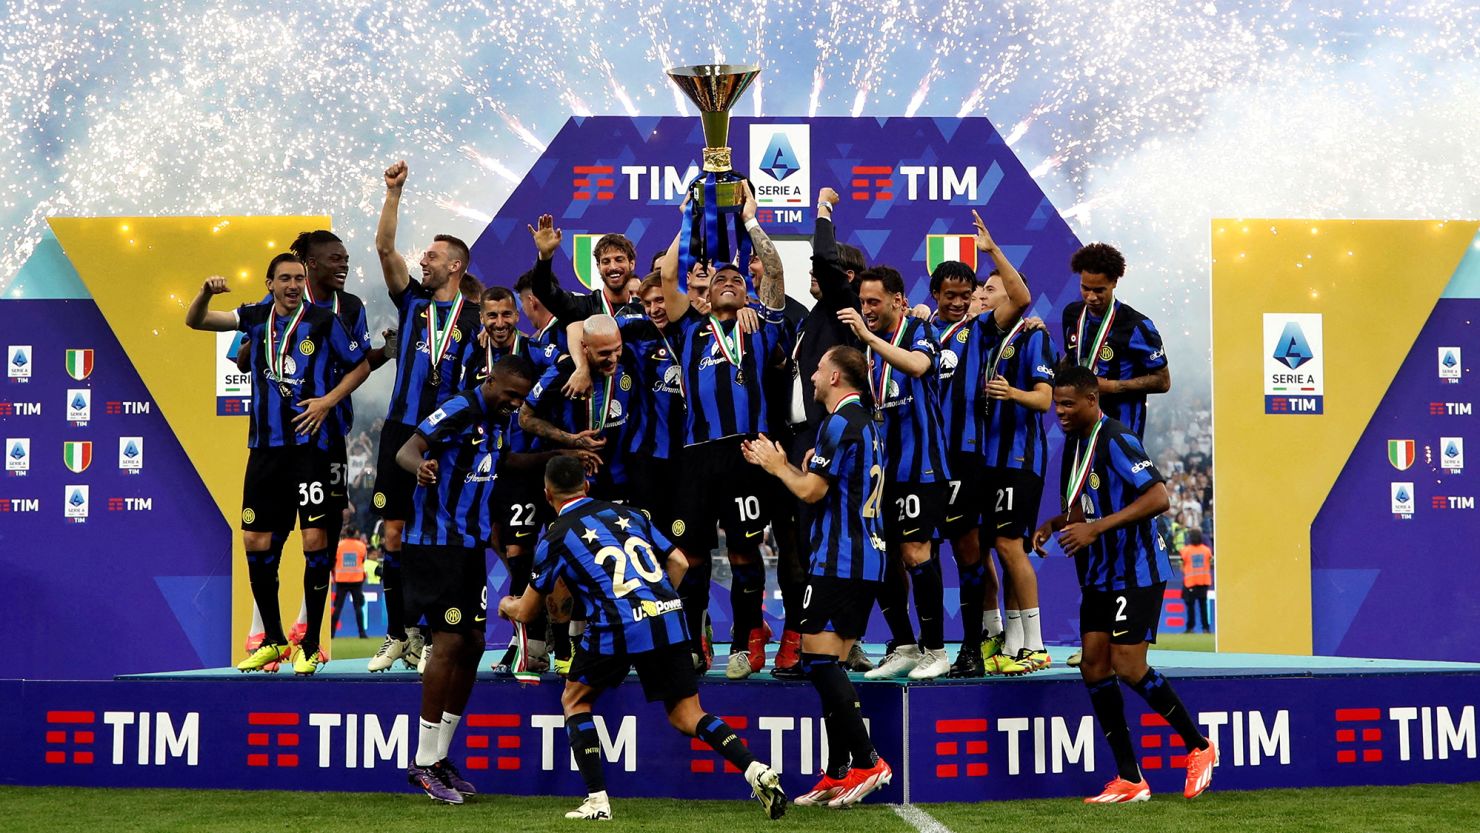 Inter Milan recently won its 20th Serie A title.